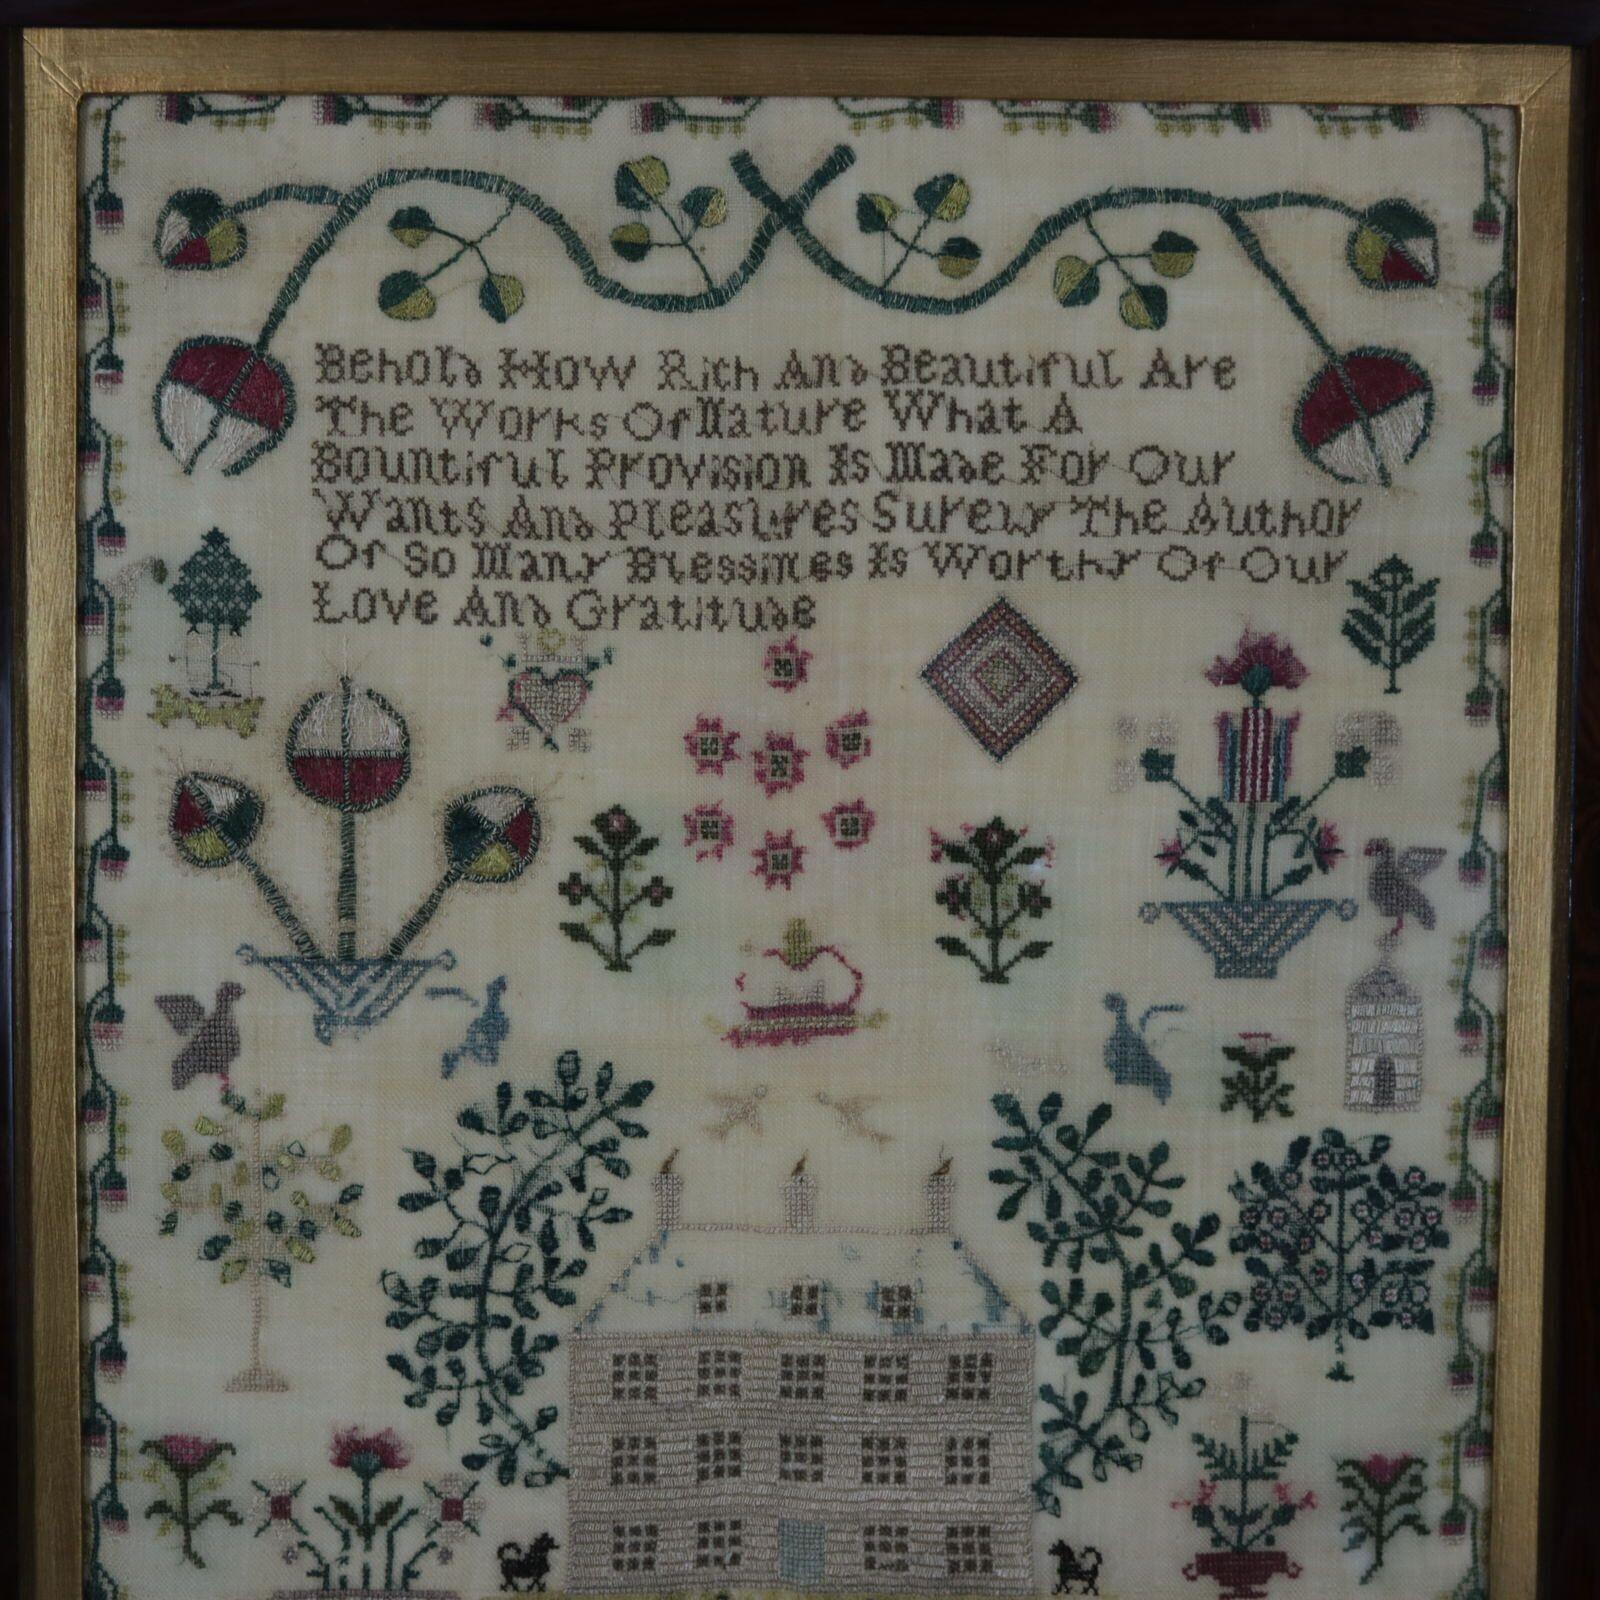 Antique Scottish House Sampler stitched by Elisabeth Murray in 1811. The sampler is worked in silk on linen ground, in a variety of stitches. Meandering strawberry border. Colours gold, cream, pale green, light brown, dark brown, gold, silver,